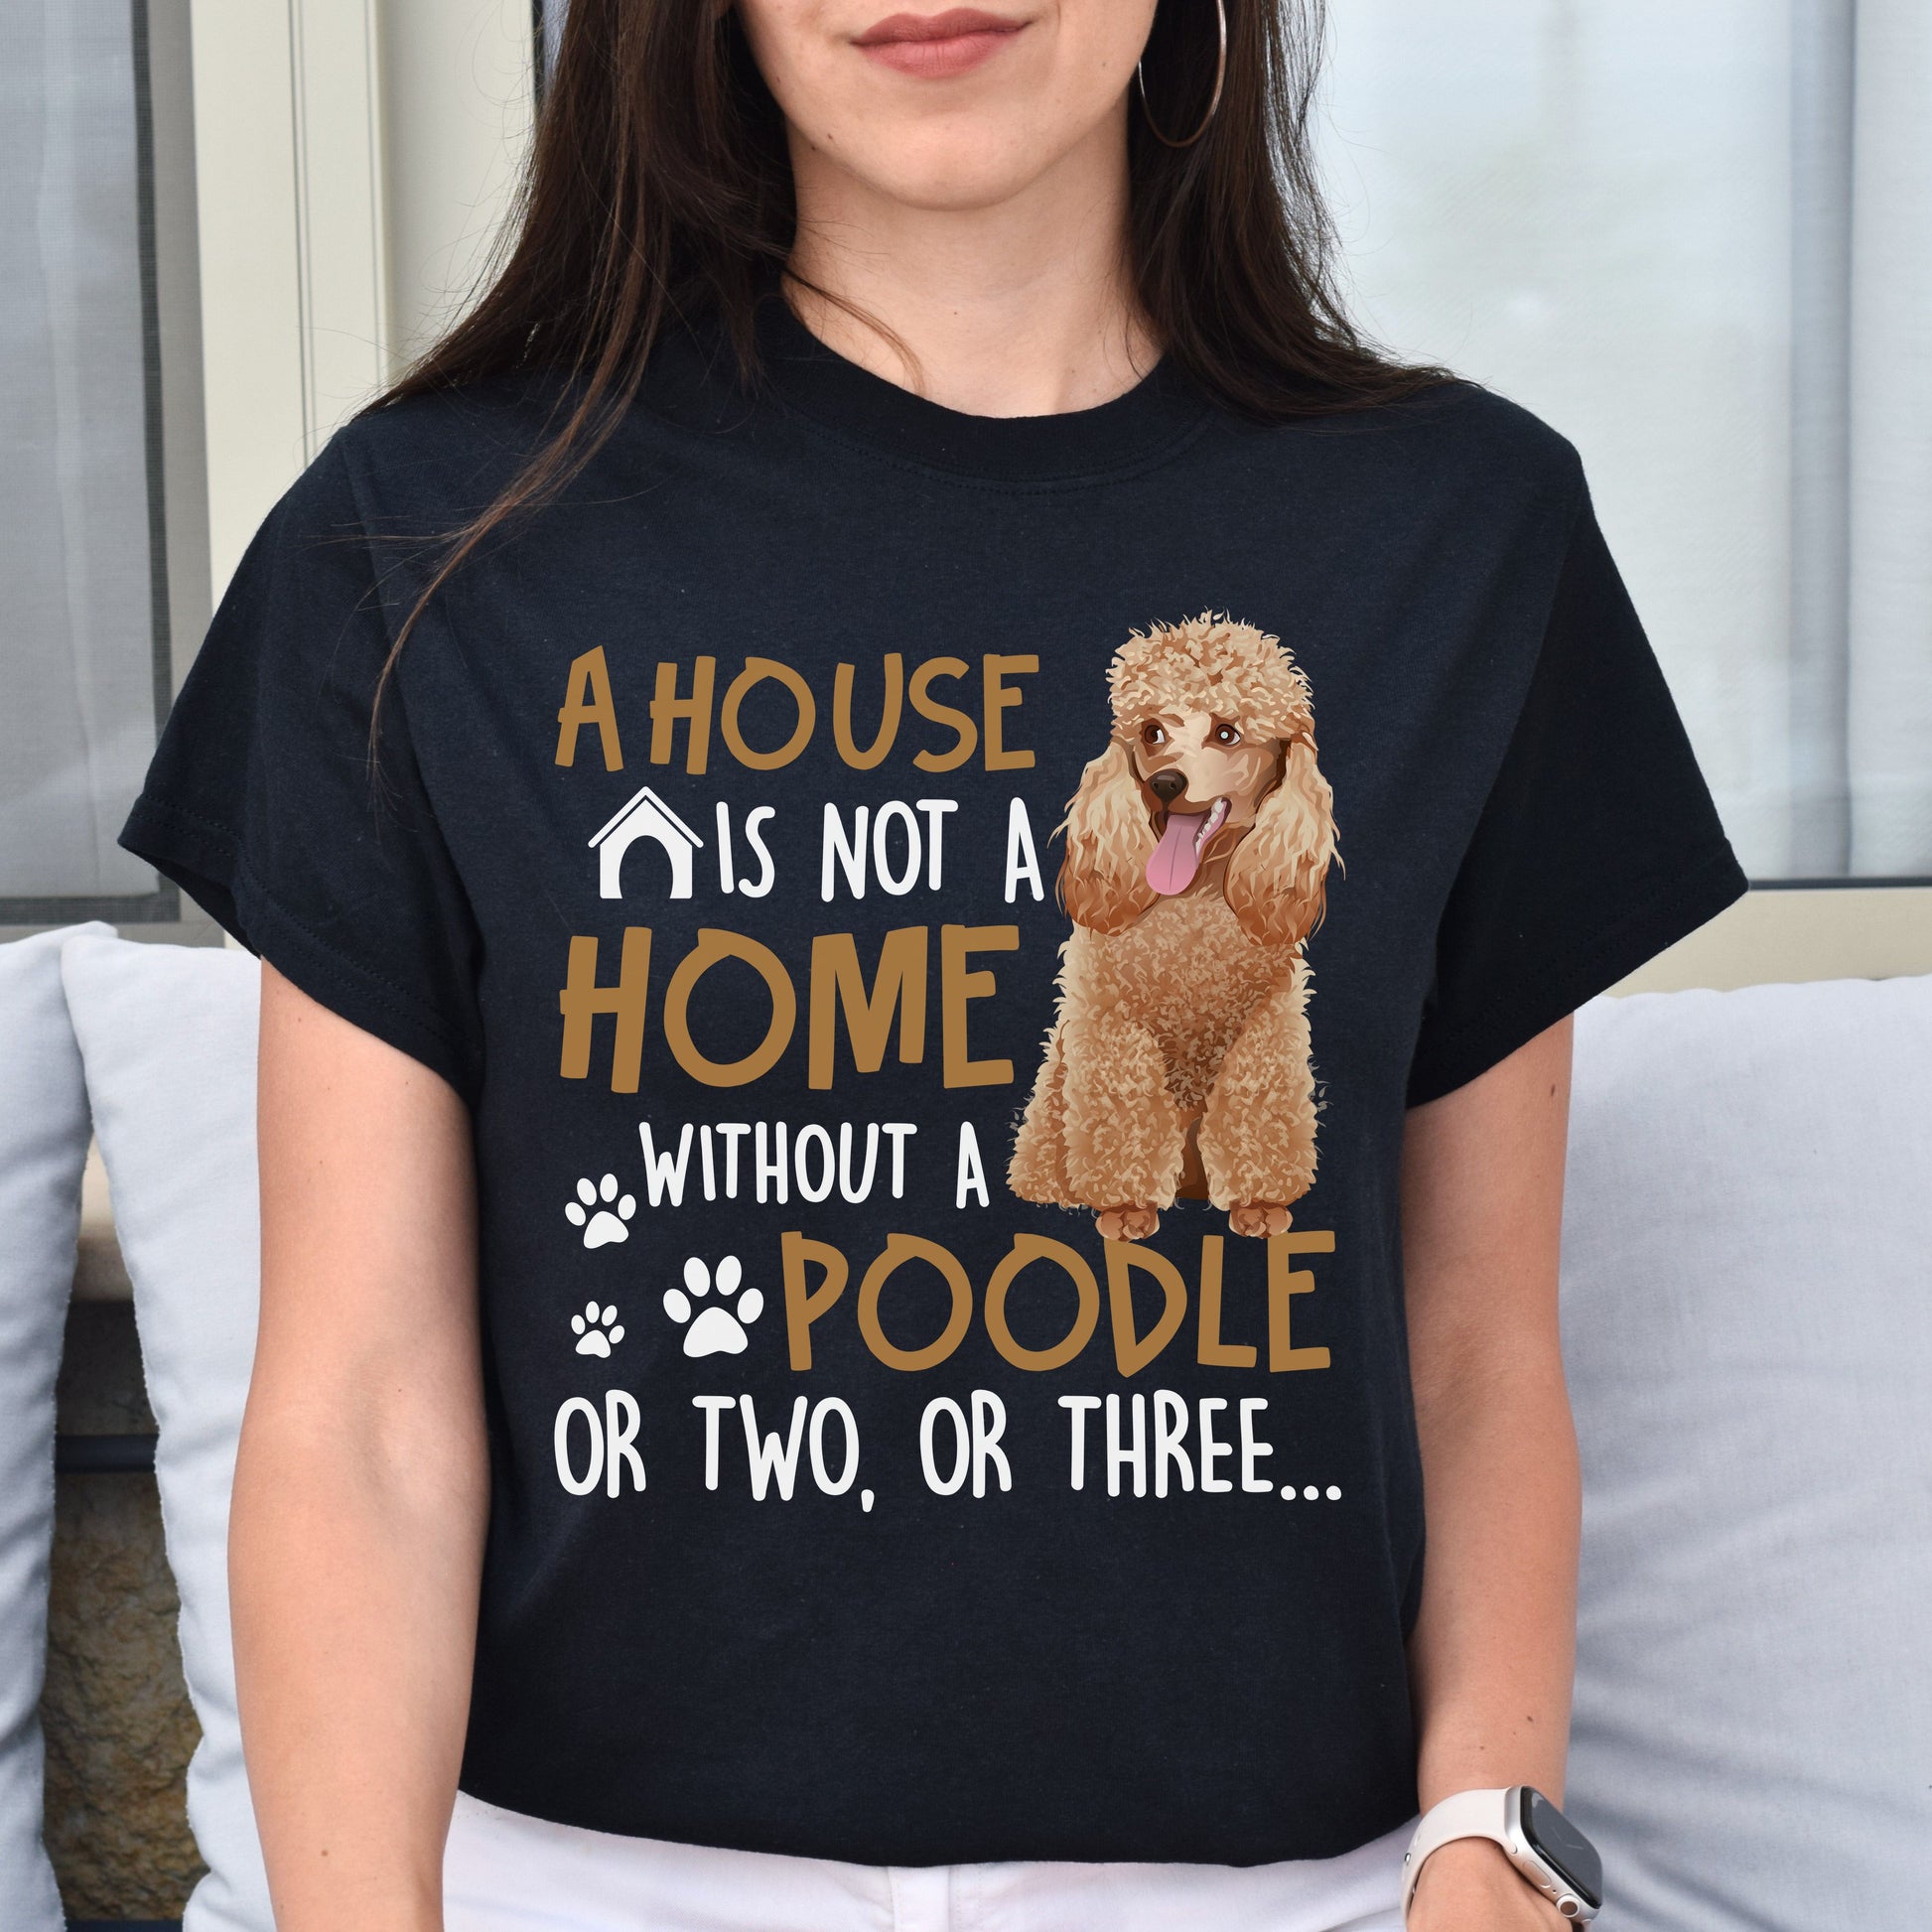 A house is not a home without a poodle Unisex t-shirt gift black navy dark heather-Family-Gift-Planet